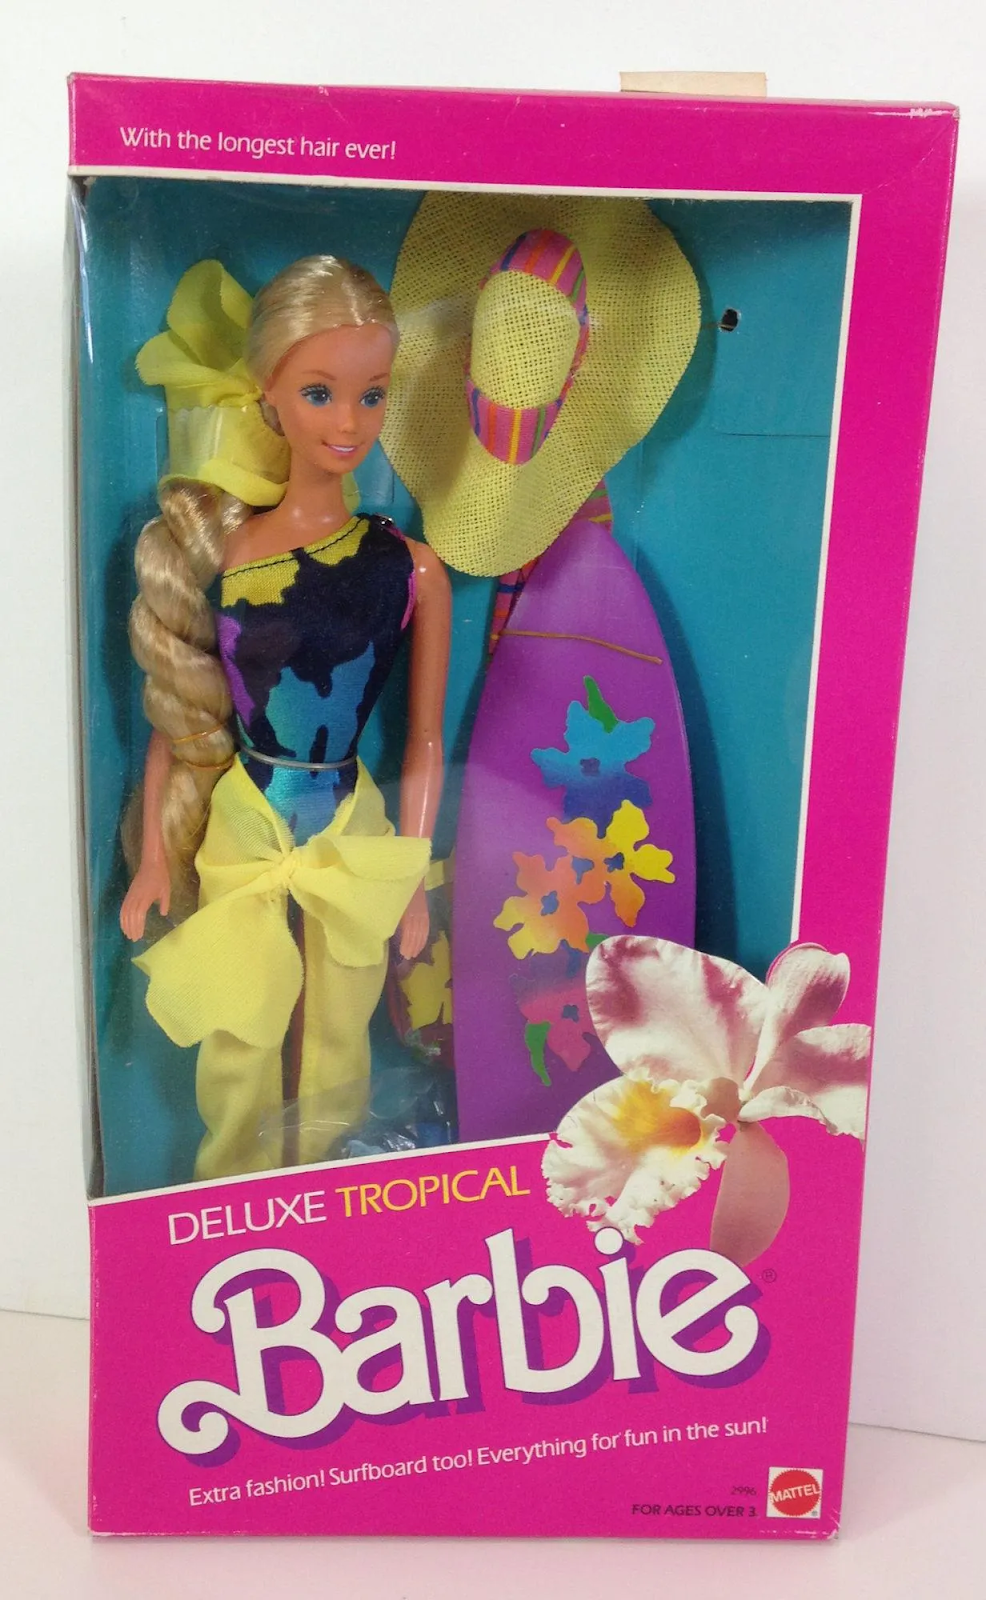 Spanje Instrueren Plateau Top 10 most iconic Barbie dolls of the 1980s